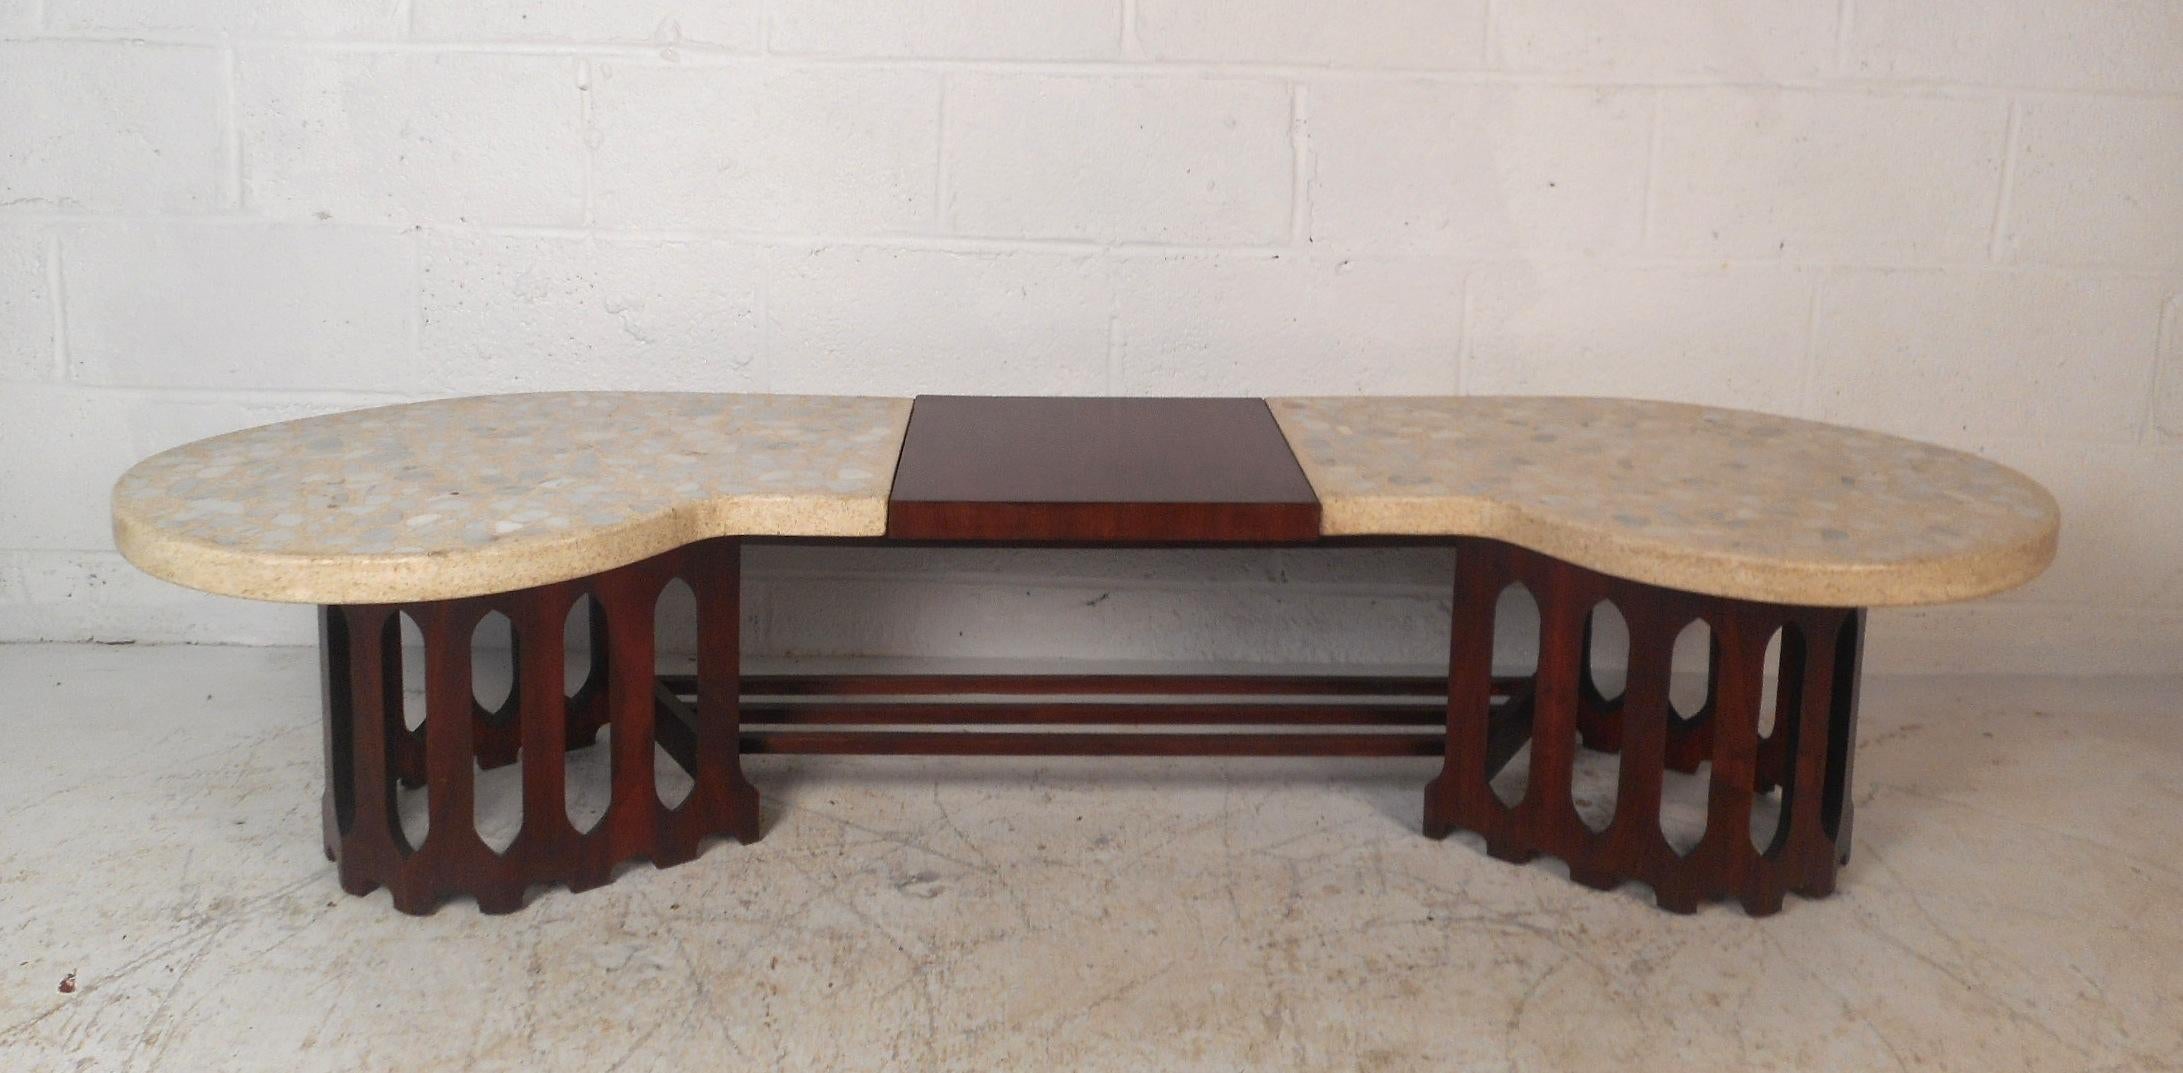 This beautiful Mid-Century Modern coffee table features an unusually shaped top and a sculpted base. A two-tone design with inlaid stones and walnut wood on the top. The sculpted base has three stretchers connected to each side for added sturdiness.